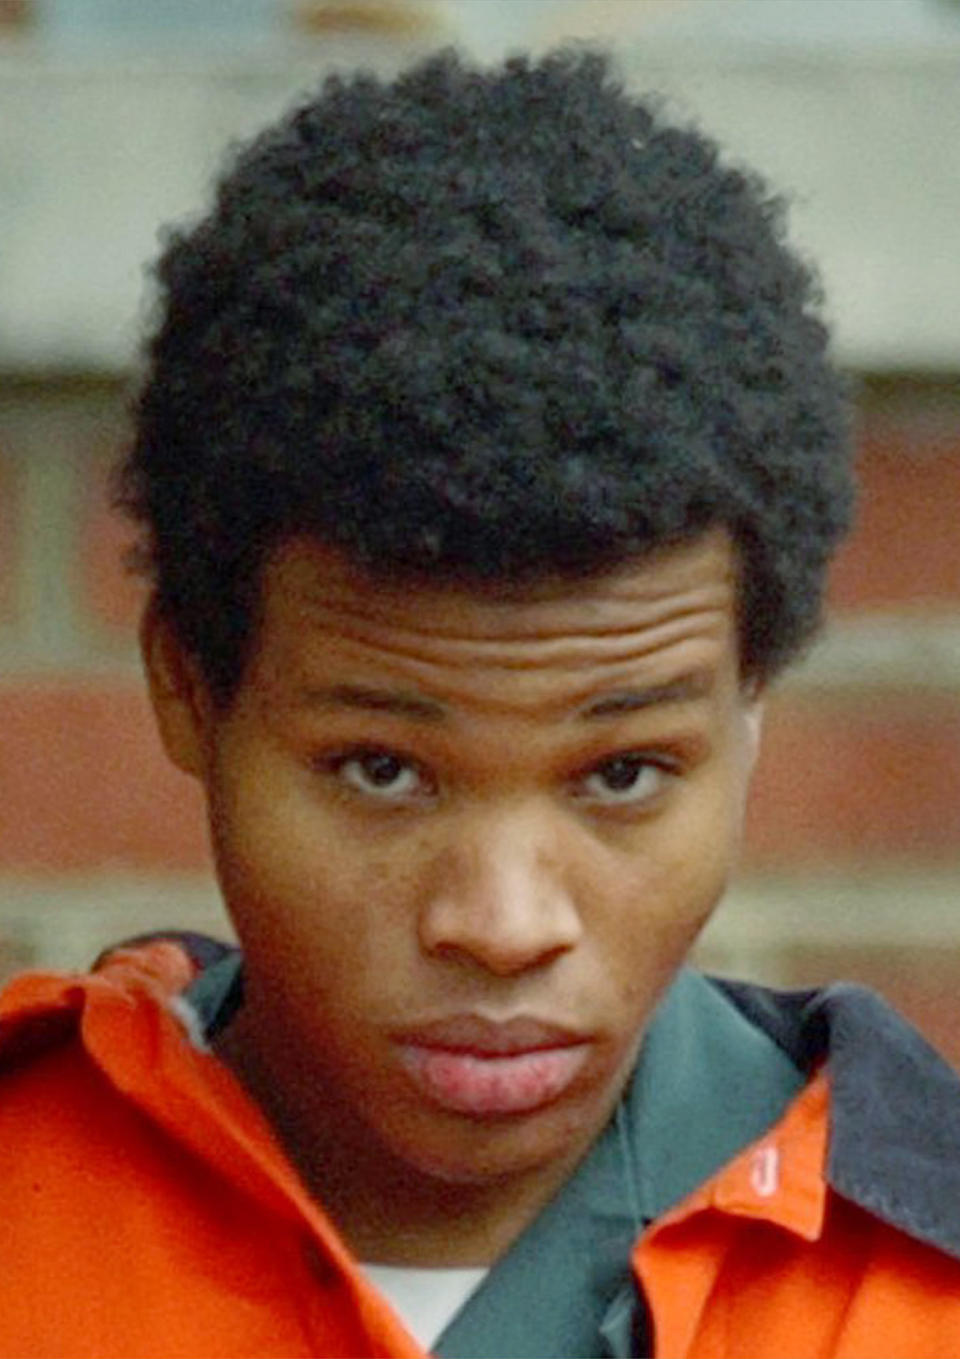 FILE -- Lee Boyd Malvo is escorted out of Fairfax Juvenile and Domestic Relations Court after a hearing in Fairfax, Va. on Dec. 30, 2002. An eight-episode docuseries, “I, Sniper,” features Malvo, half of a two-man sniper team that killed 10 and terrorized the Washington D.C. region in 2002. The filmmakers coaxed Malvo to examine his life over 17 hours of phone calls. The series starts Monday on Vice TV. (AP Photo/Susan Walsh/file)